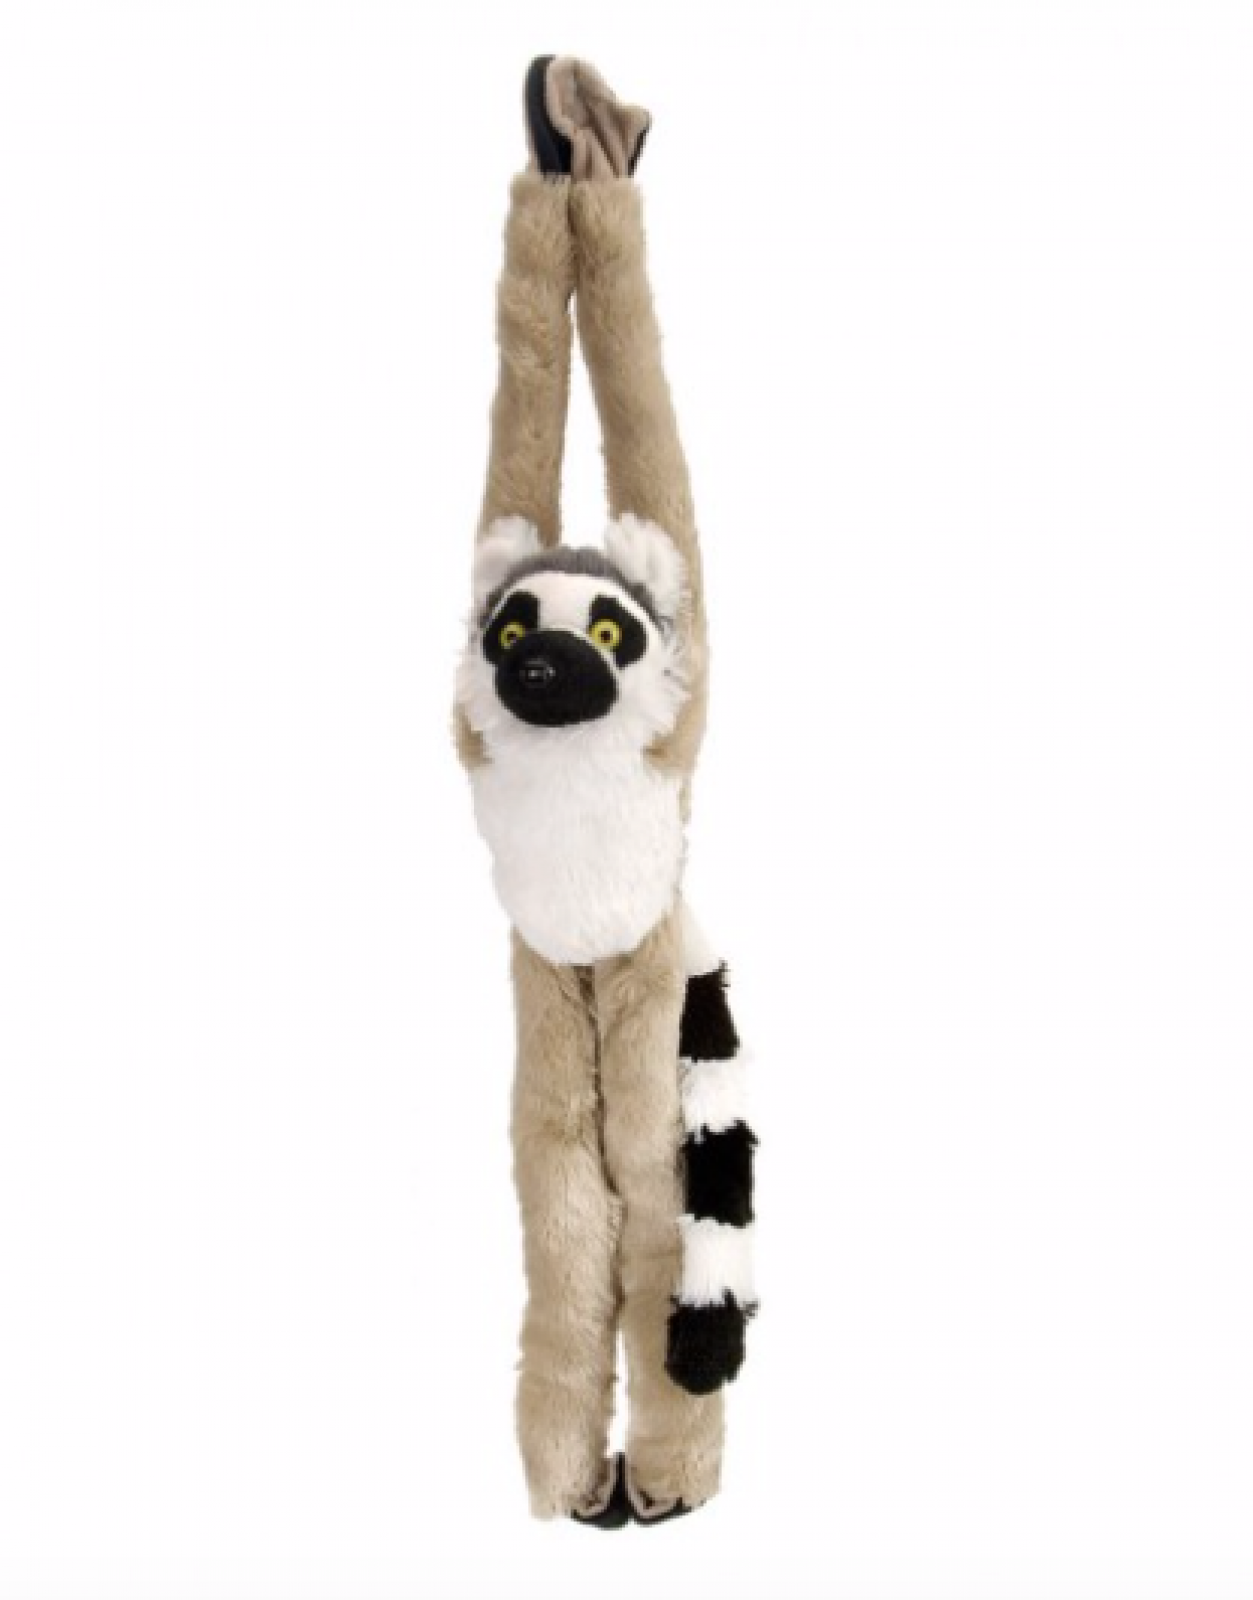 ring tailed lemur soft toy